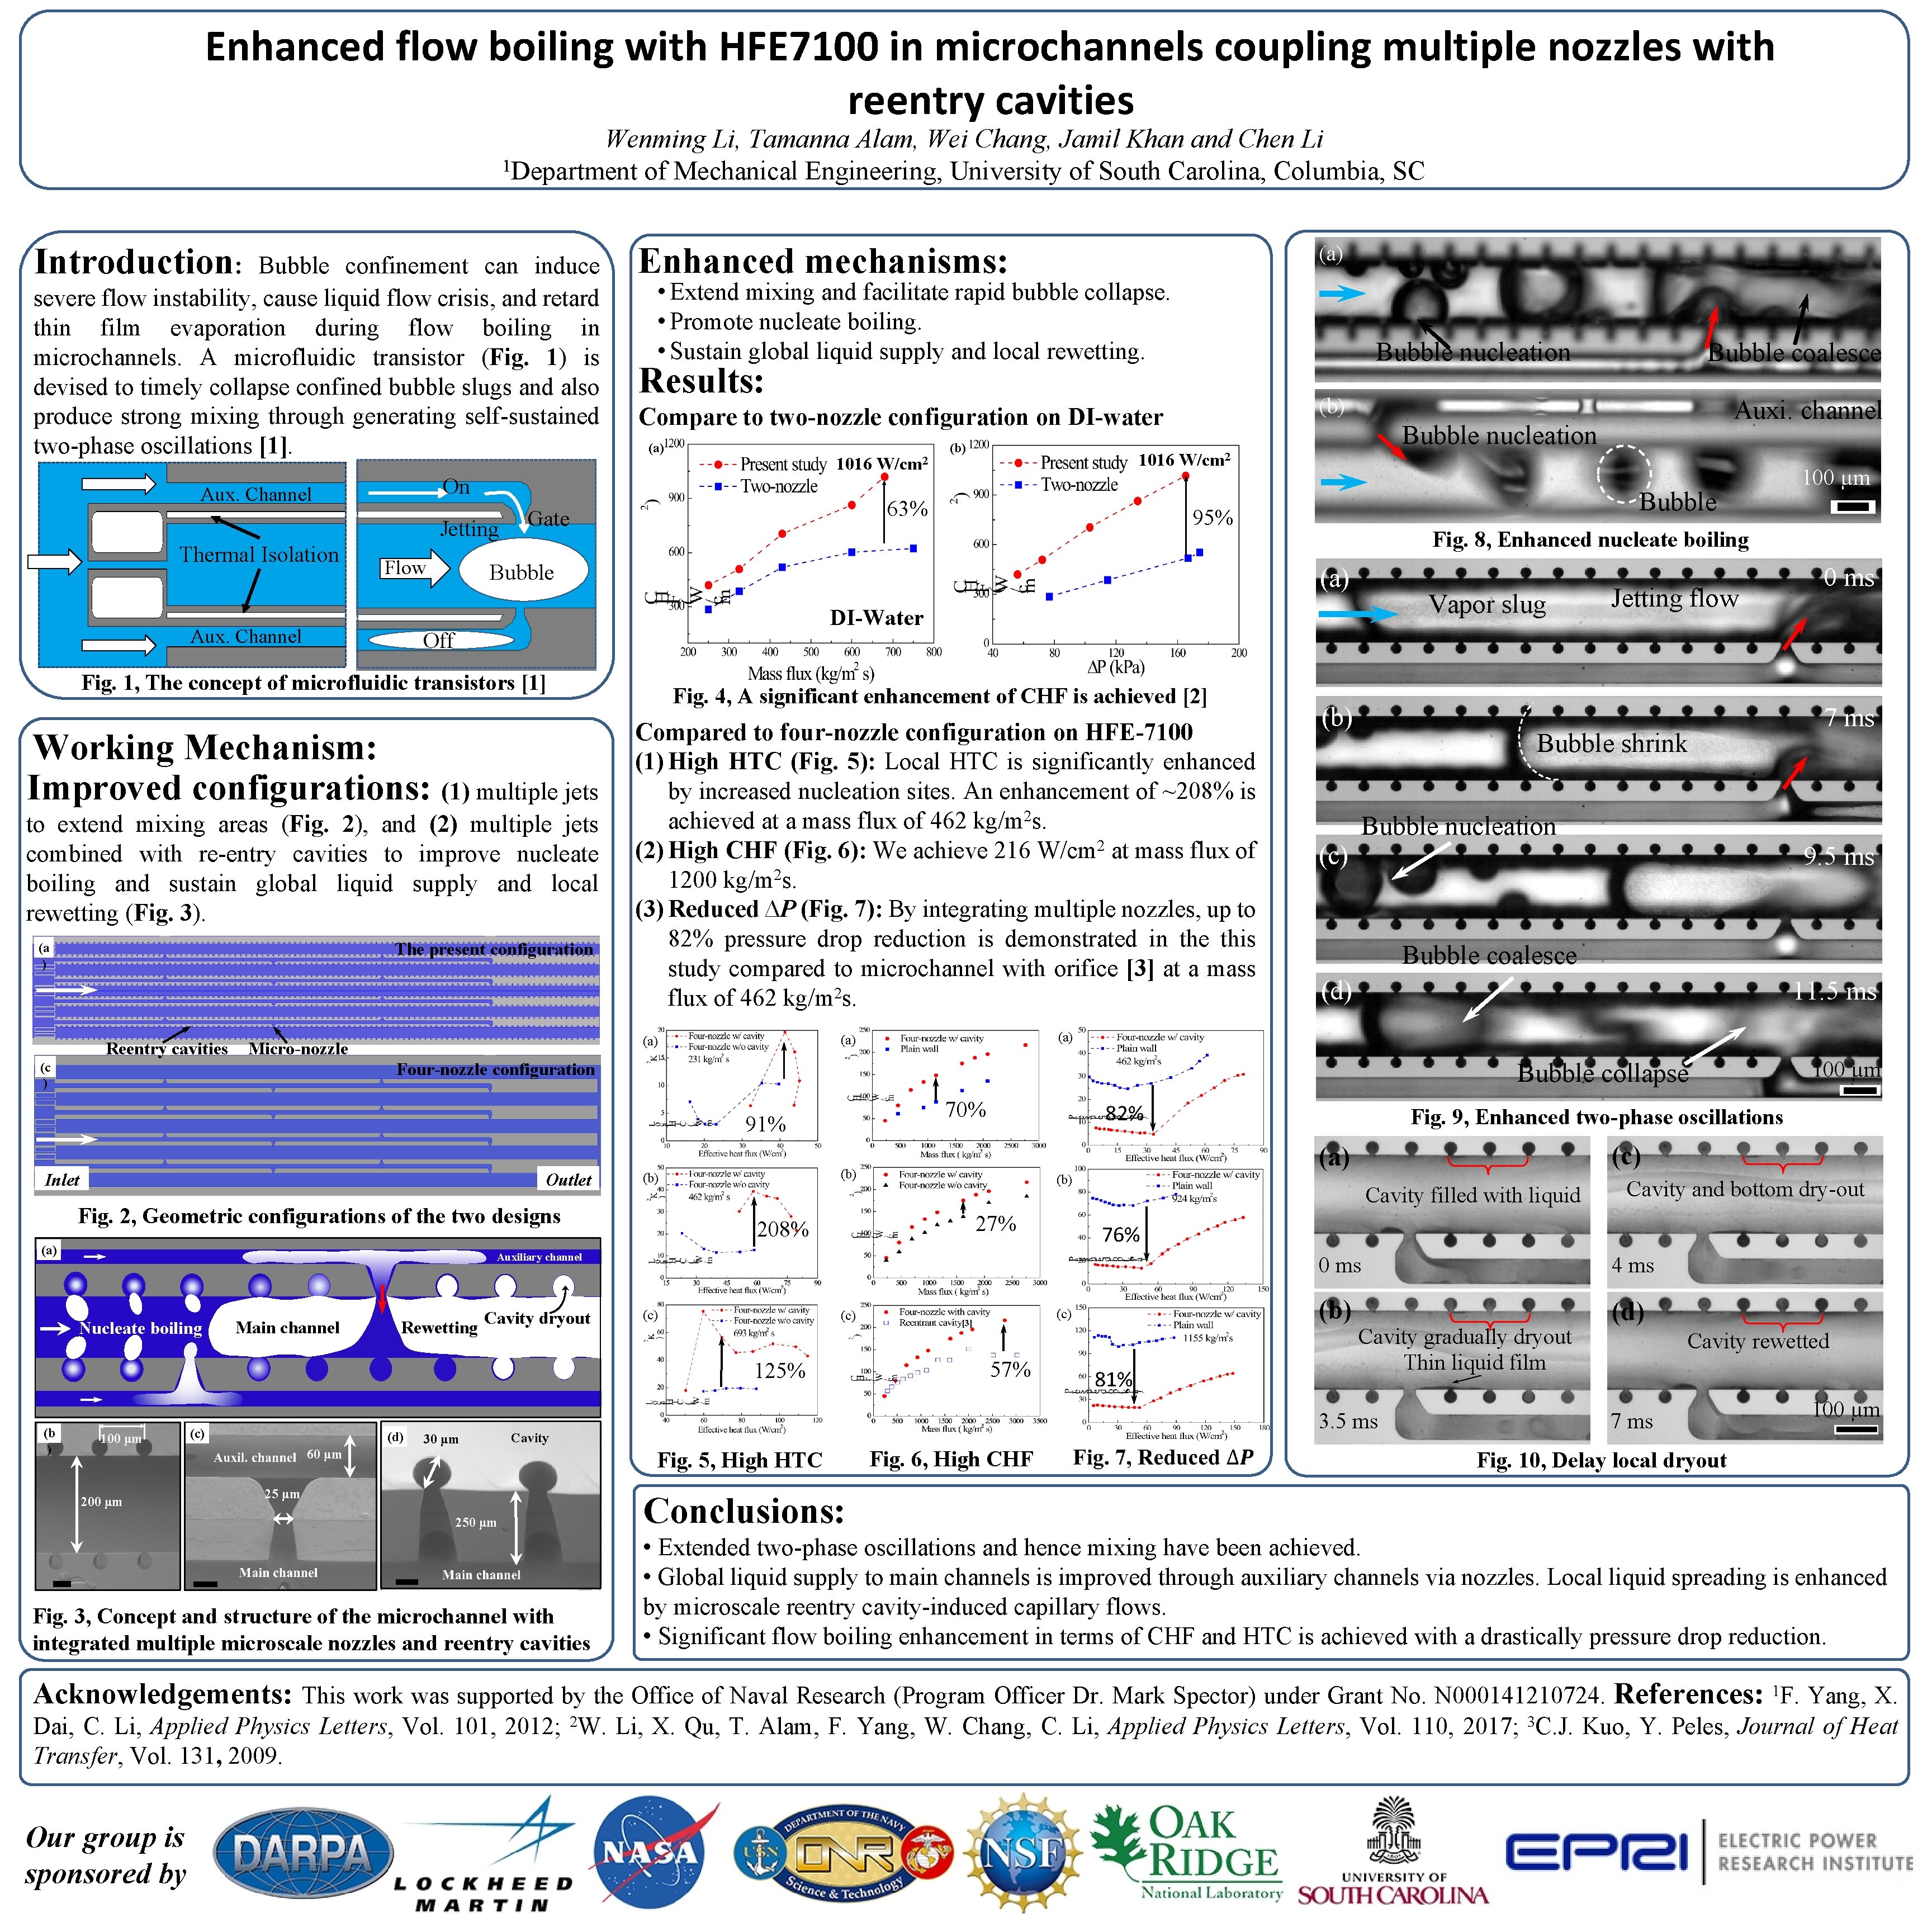 Enhanced flow boiling with HFE 7100 in microchannels coupling multiple nozzles with reentry cavities